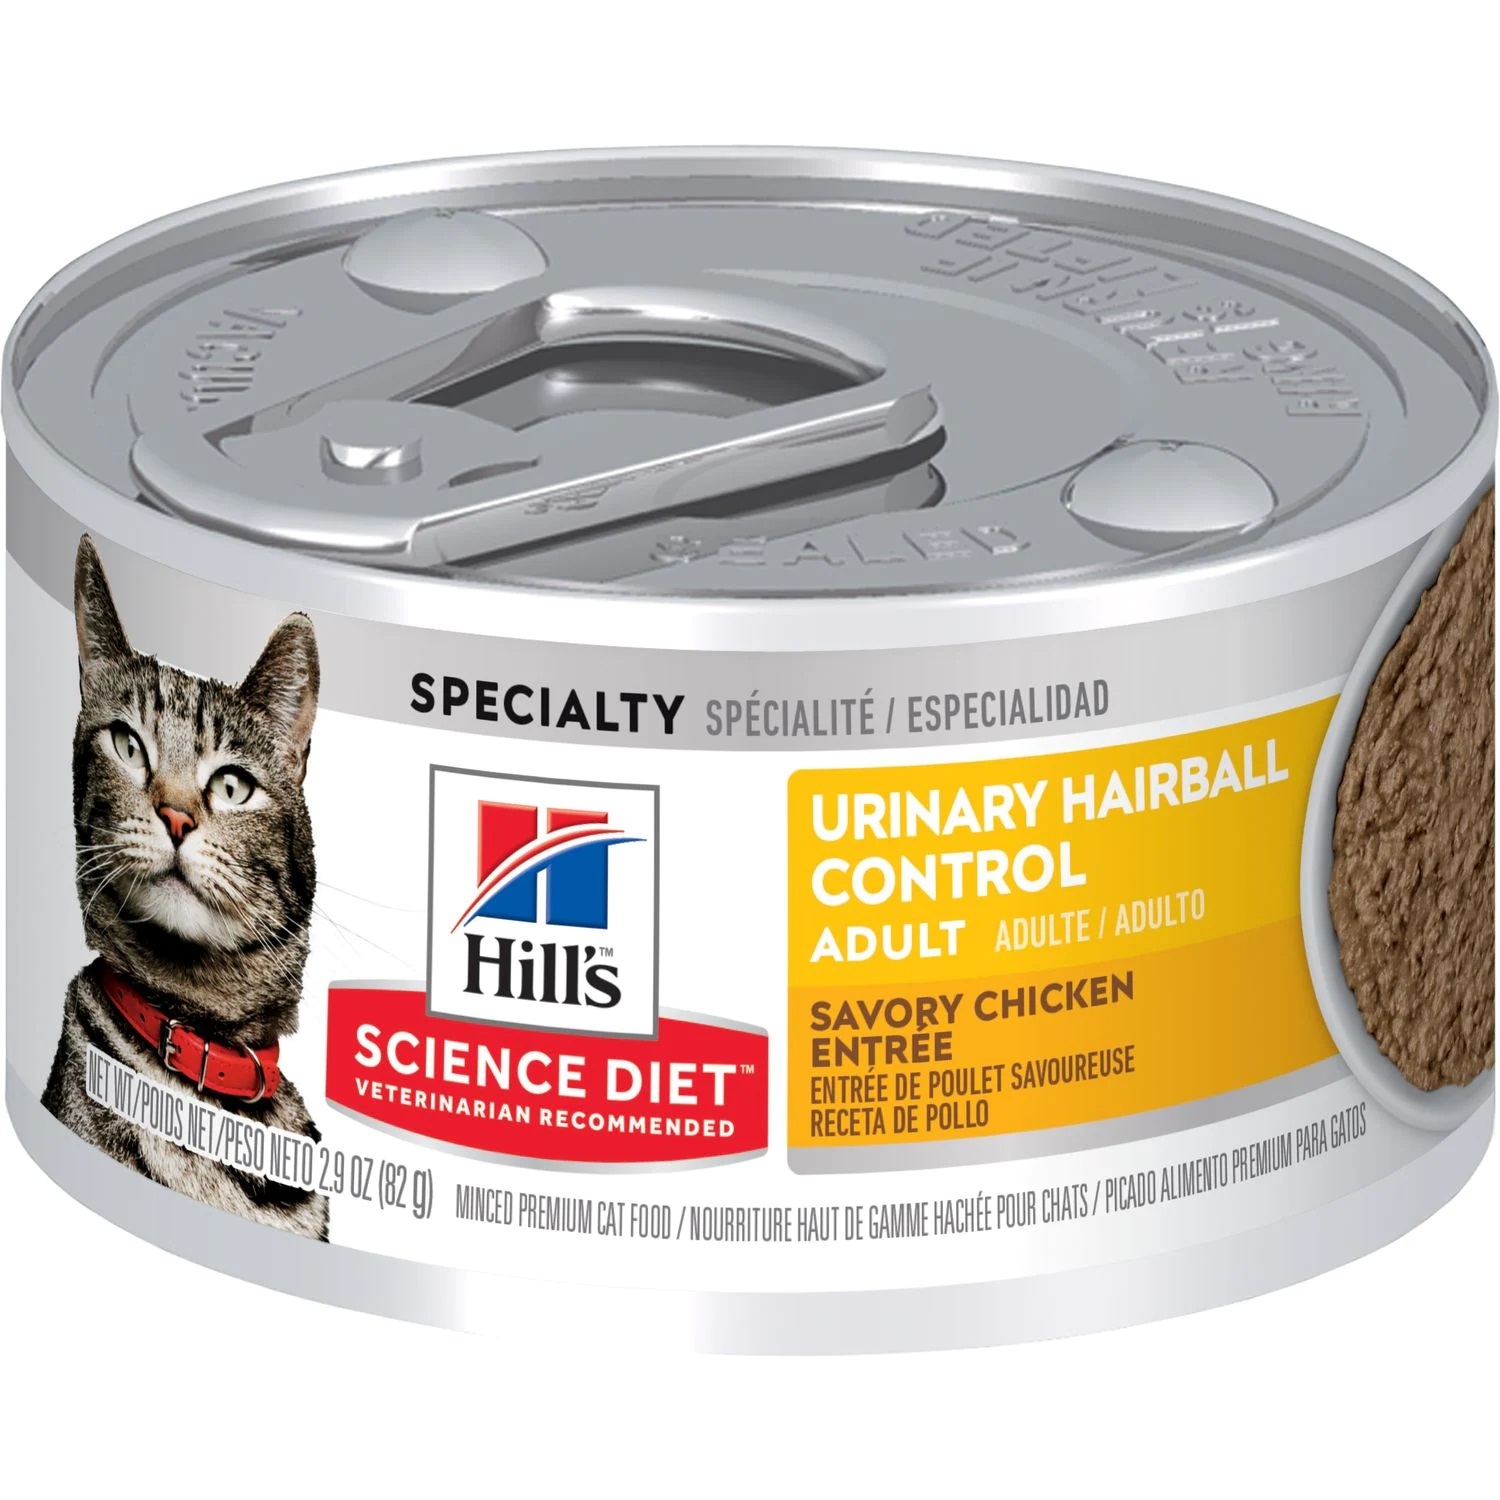 sd-feline-adult-urinary-hairball-control-canned-productShot_zoom